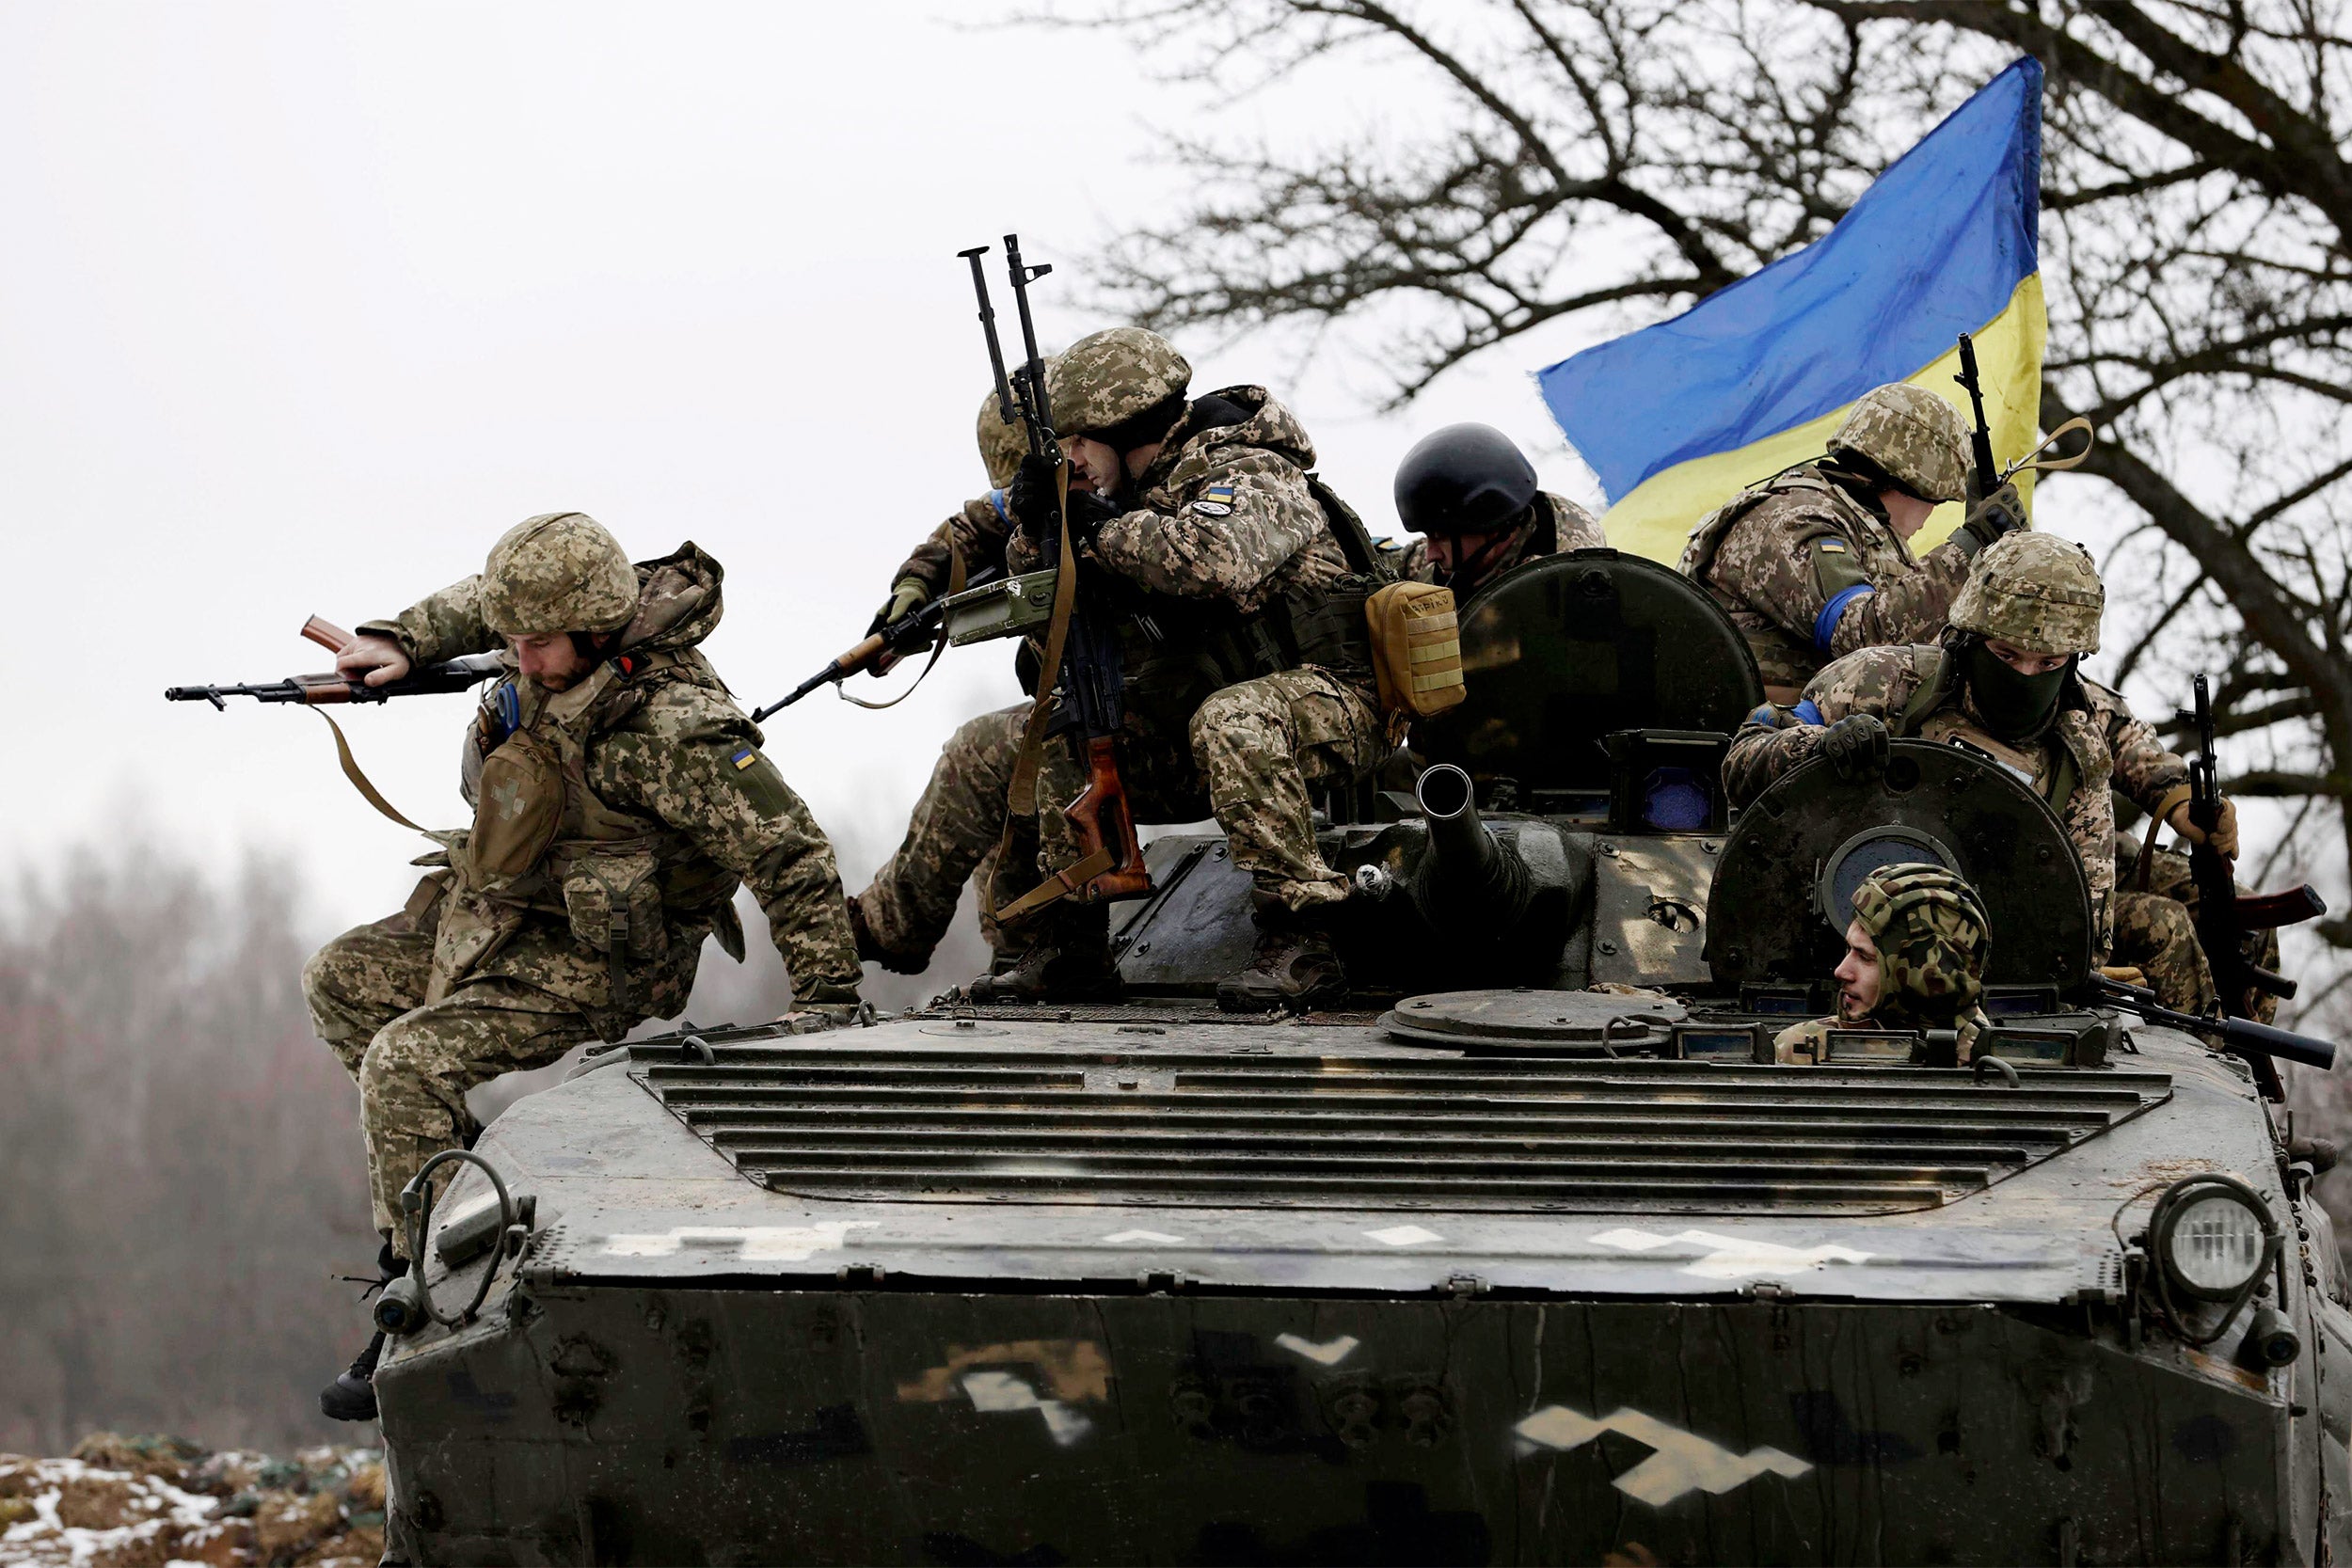 Ukrainian soldiers with a tank.